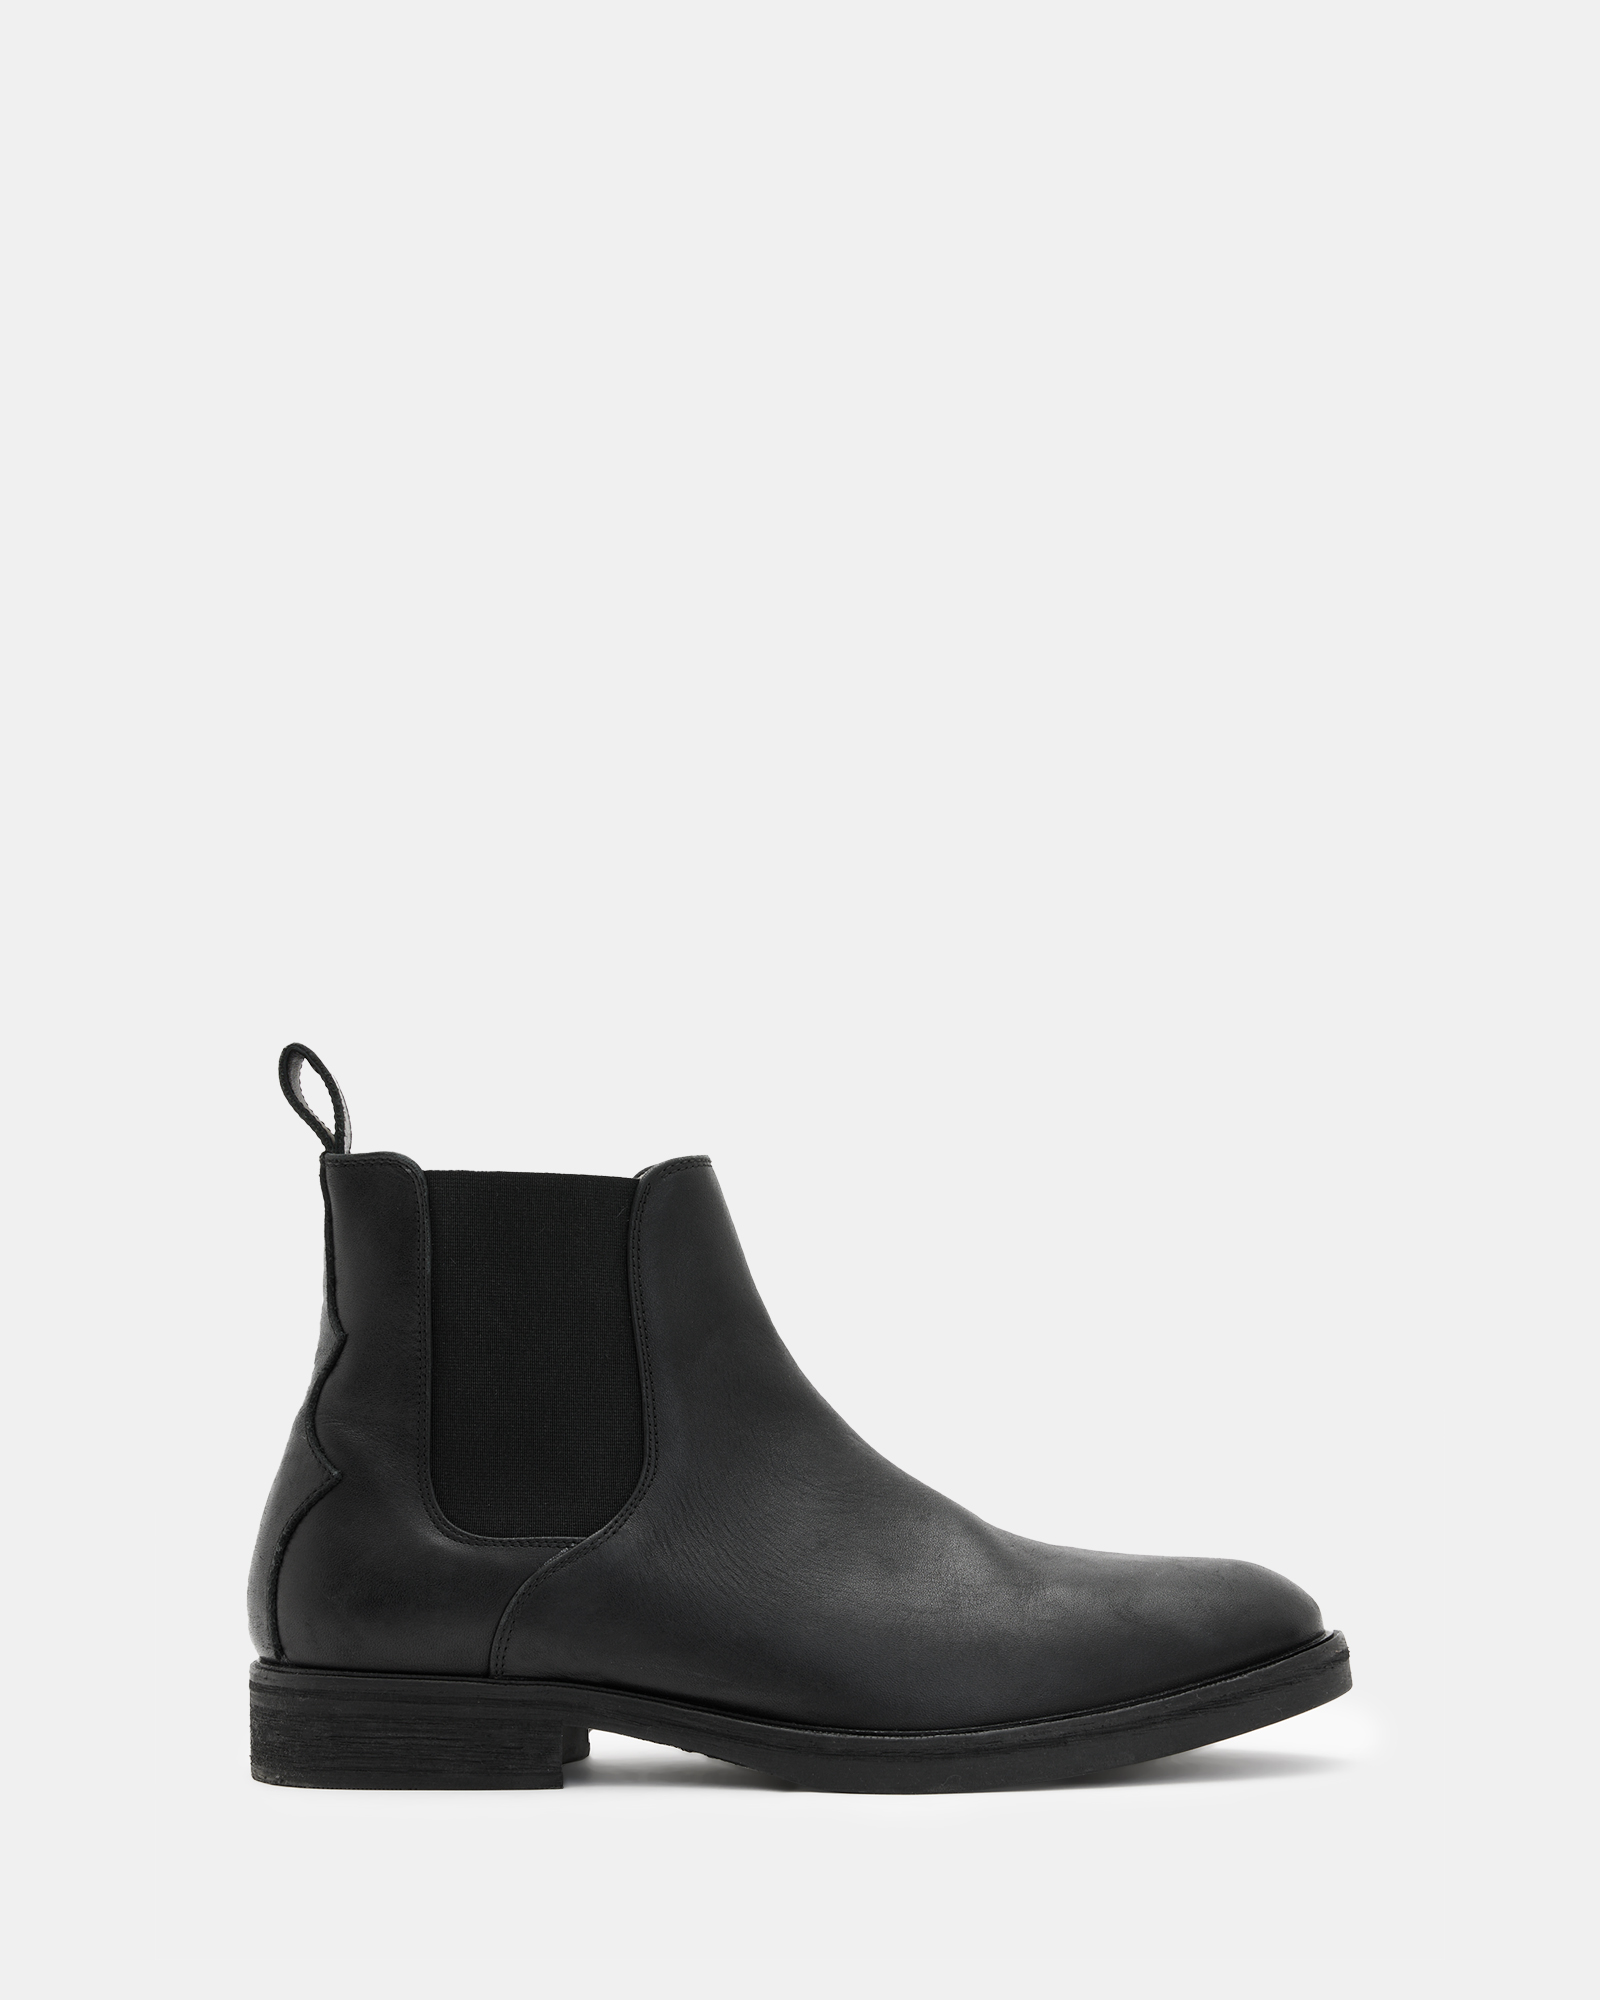 AllSaints Creed Leather Chelsea Boots